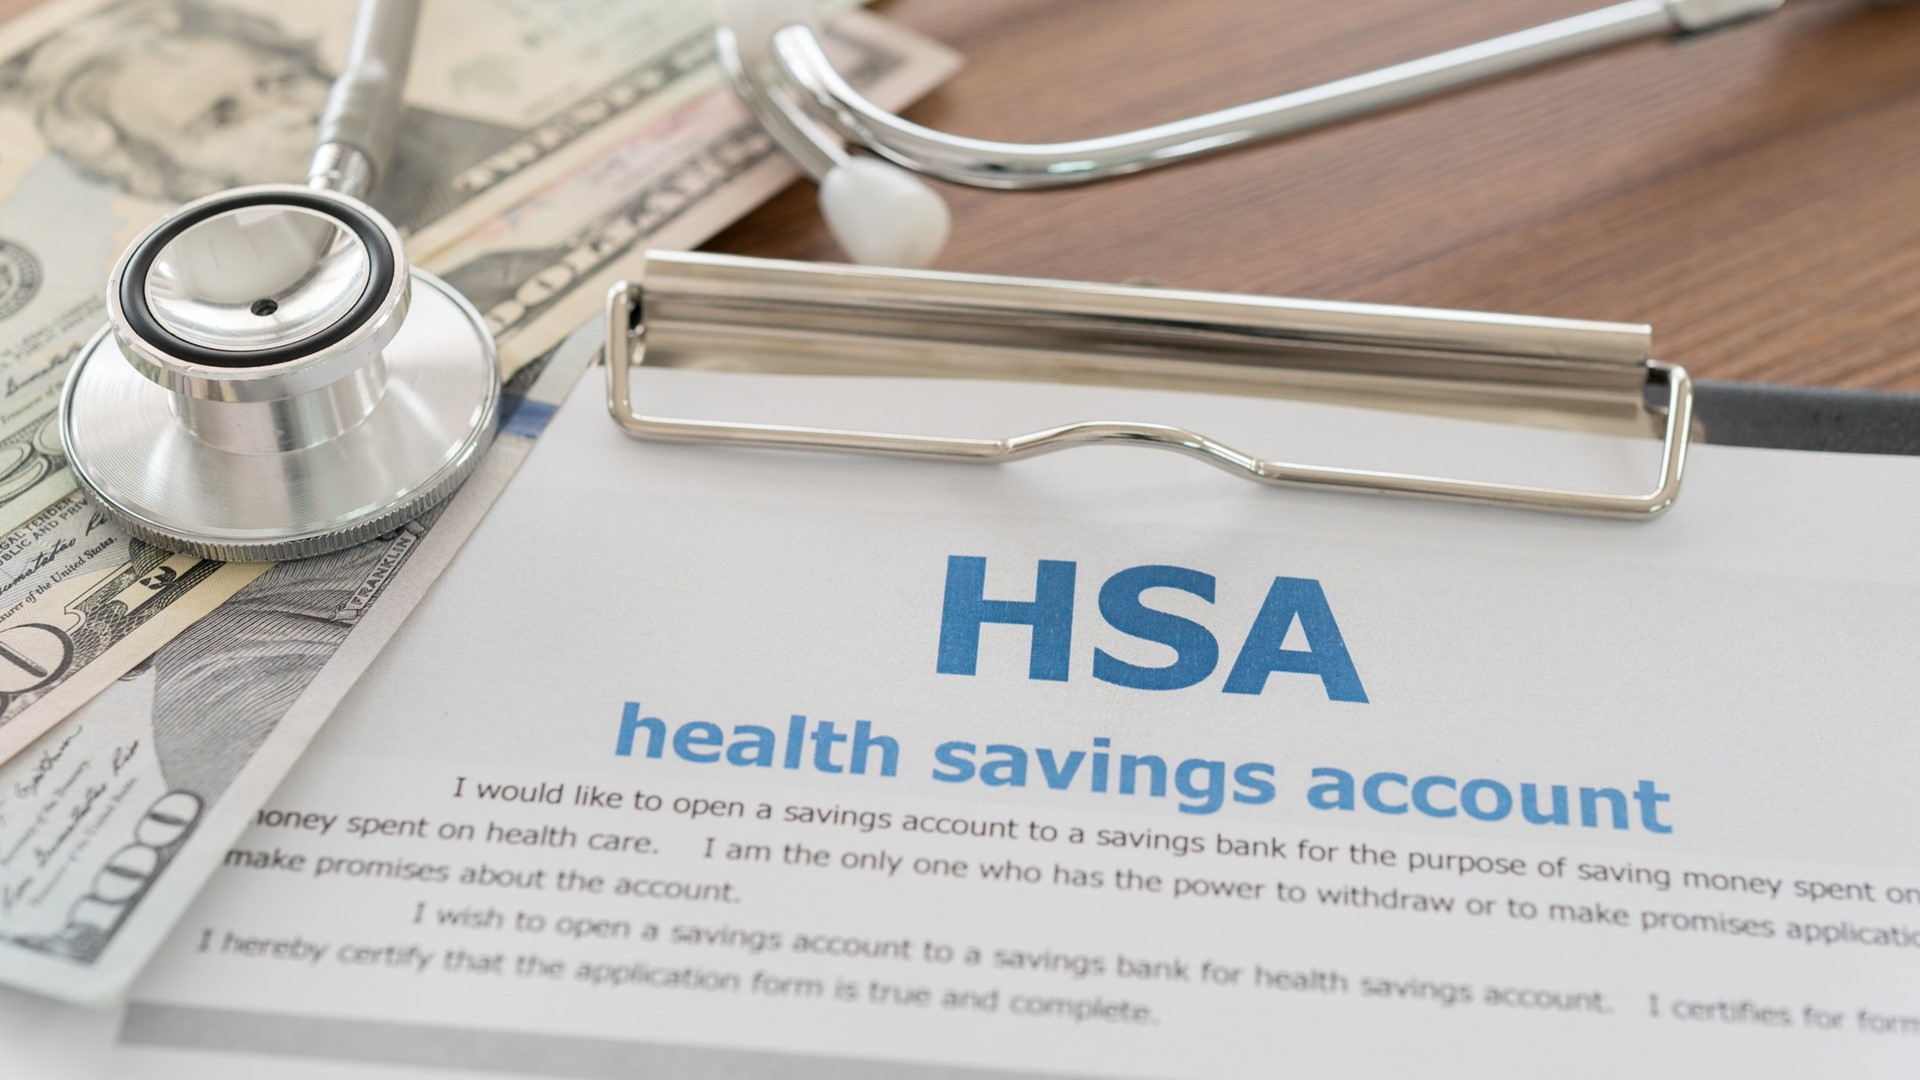 VERIFY Do HSA funds roll over or expire at the end of the year?